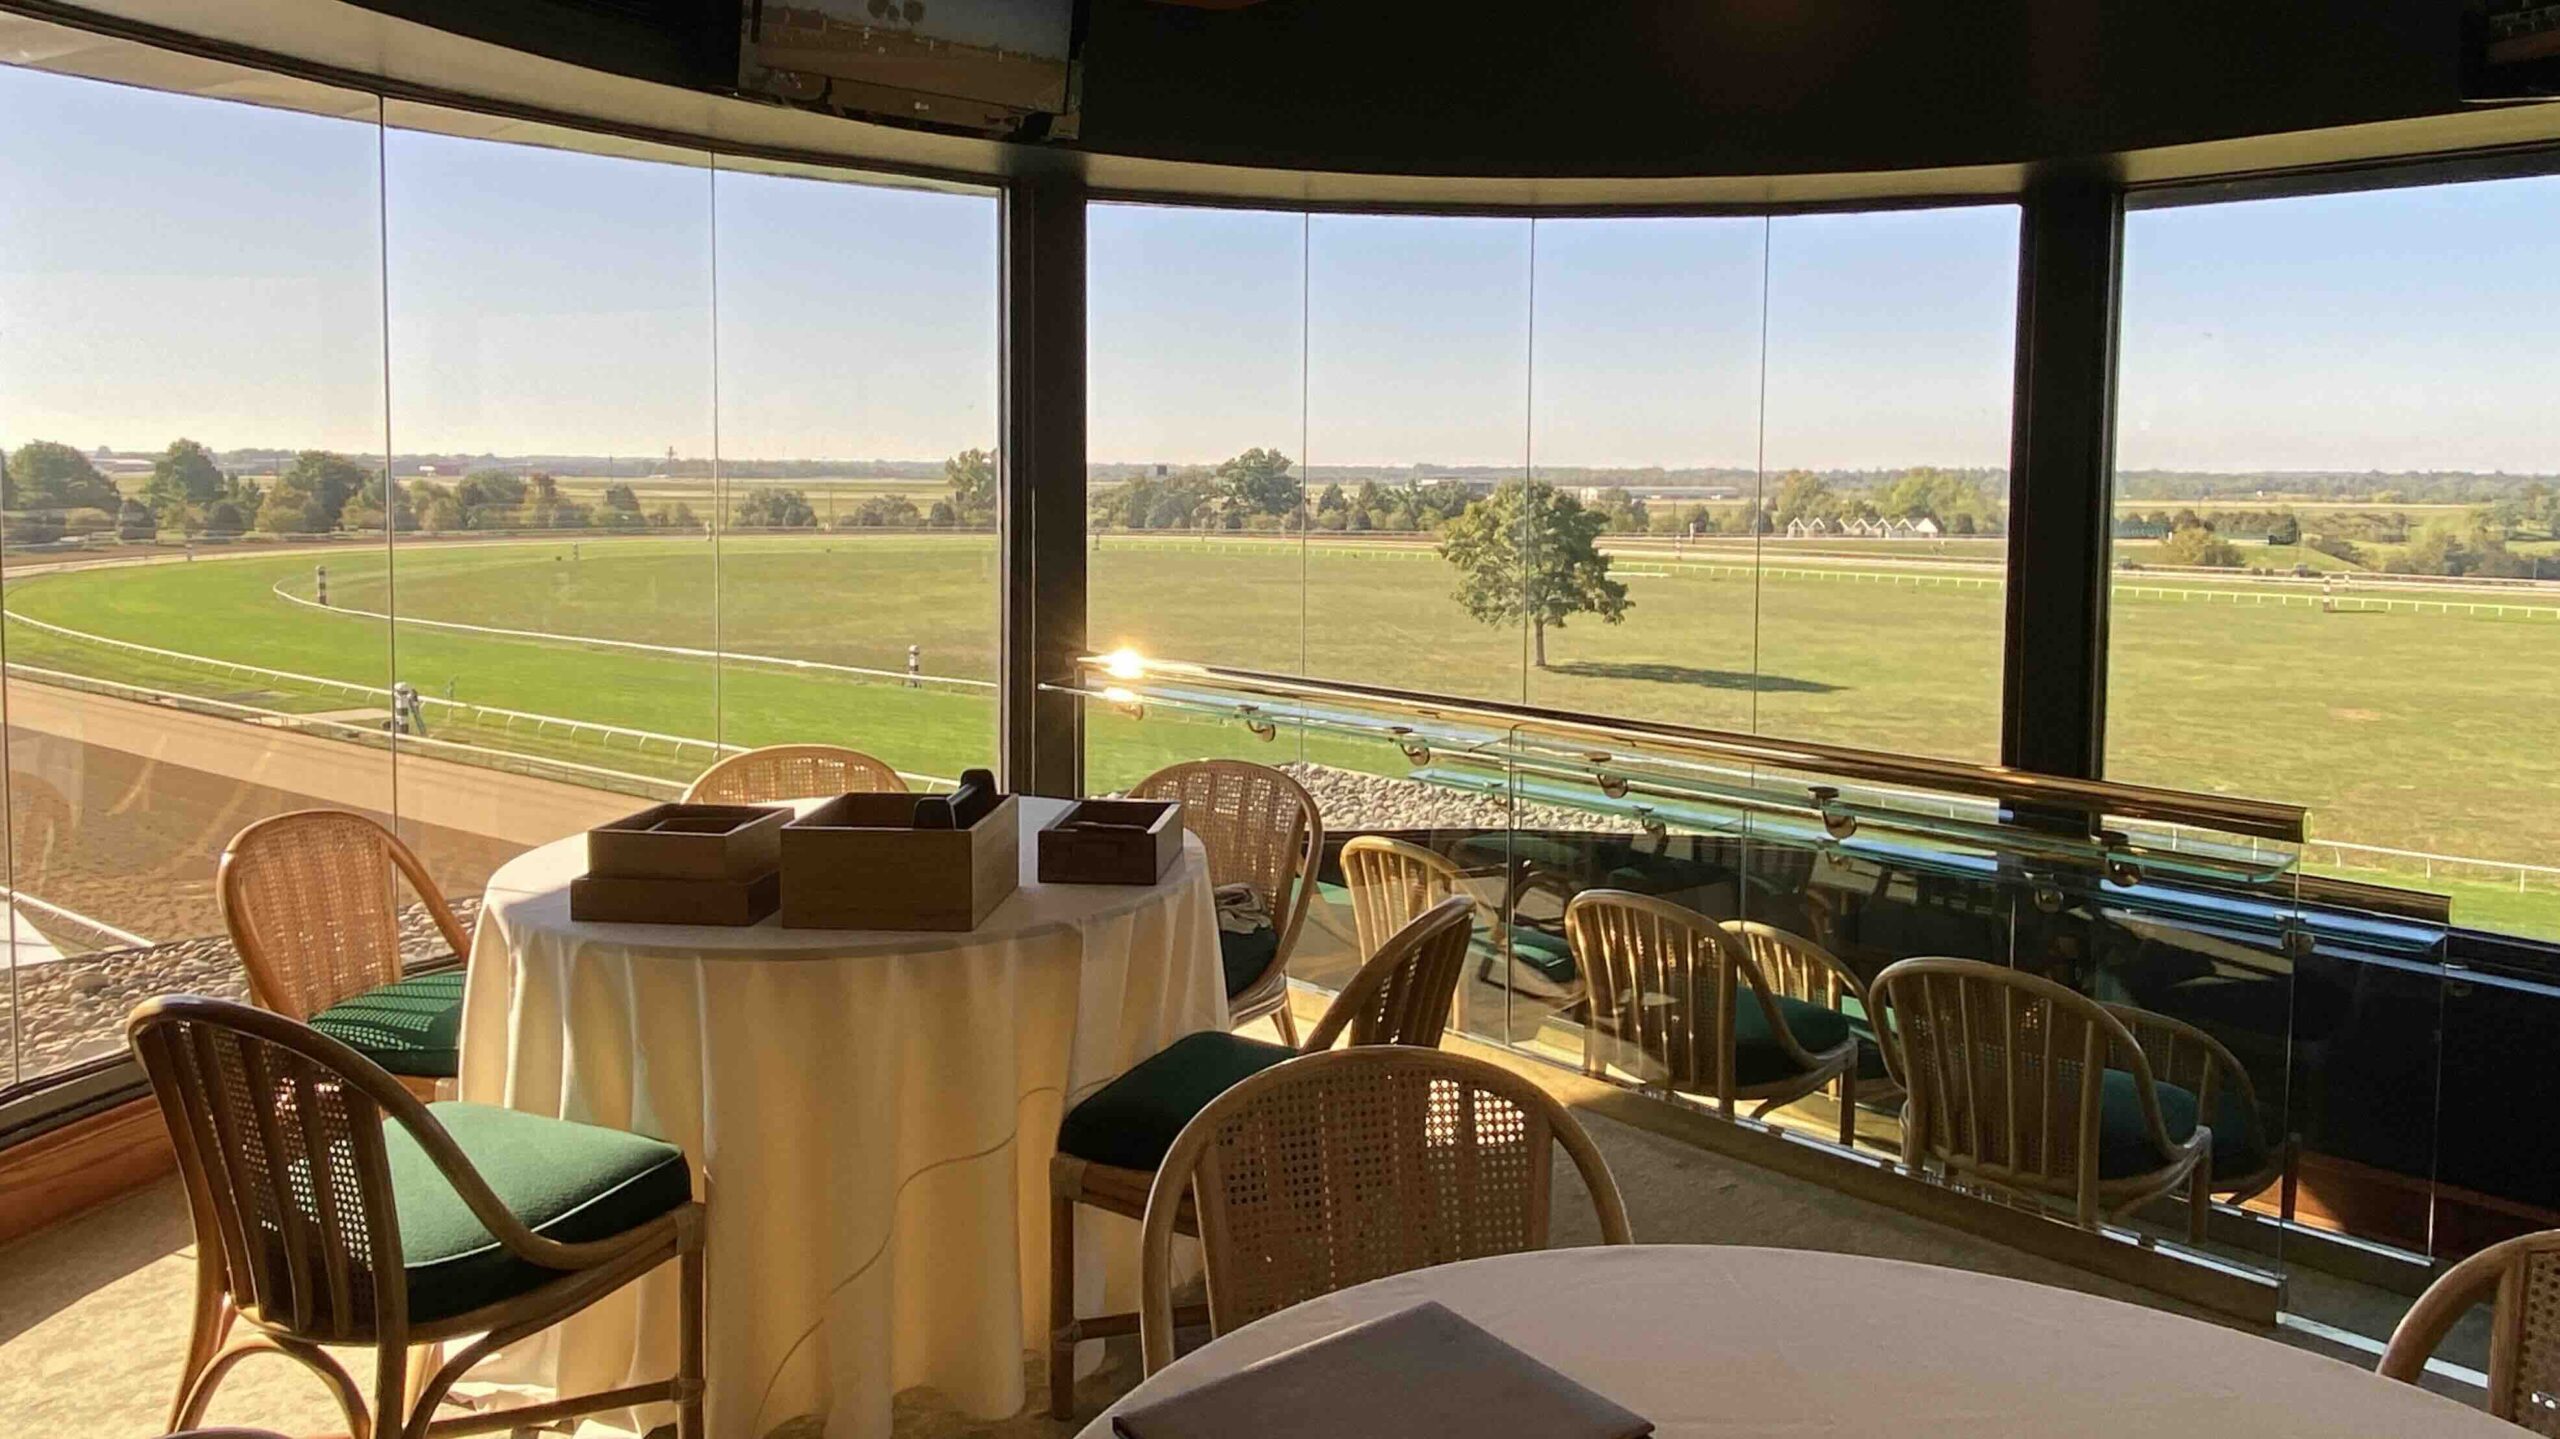 Keeneland Tours include a peek into the corporate boxes copy